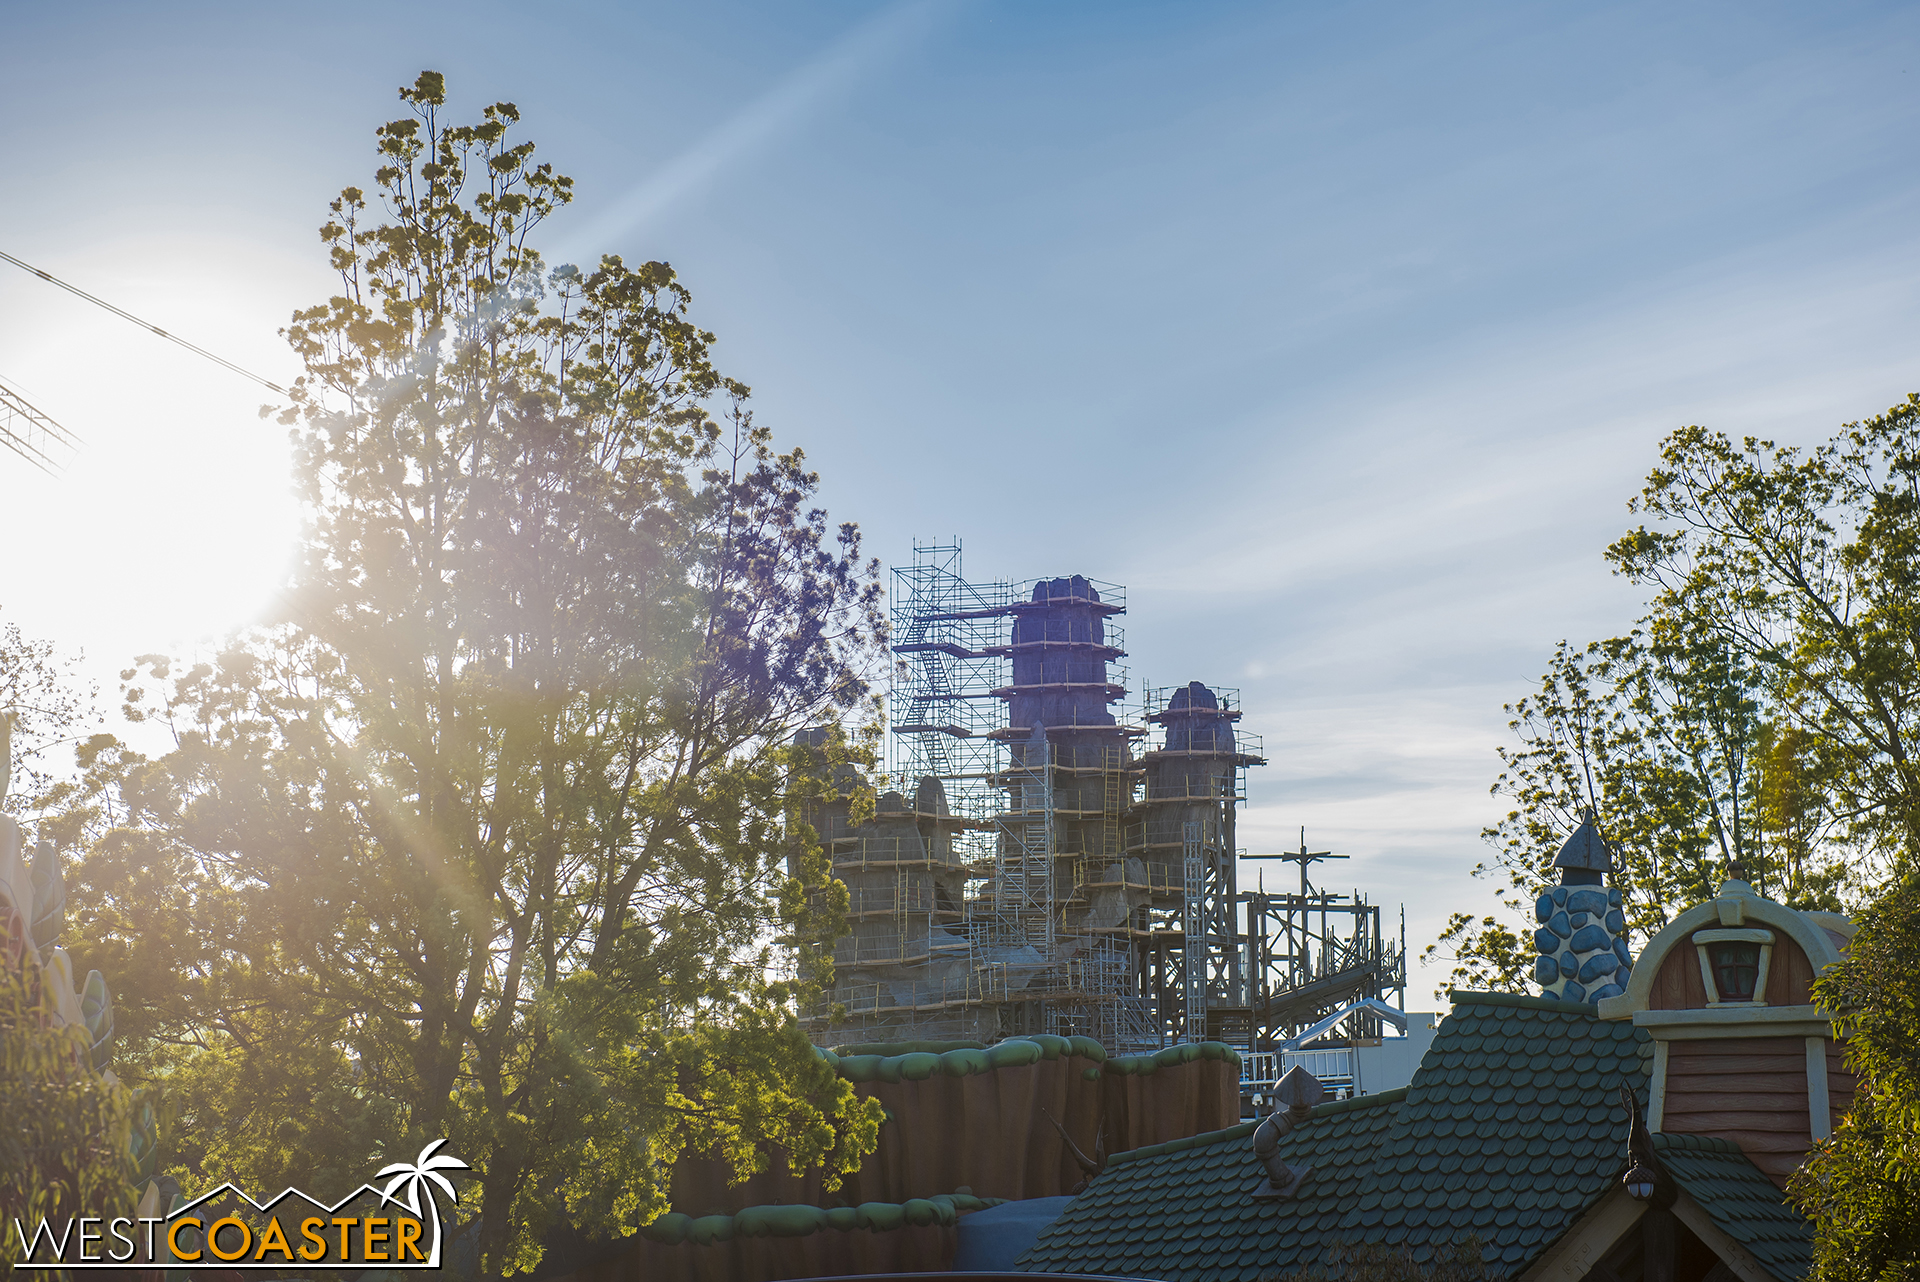  Lets teleport to Mickey's Toontown and check out progress in earnest. 